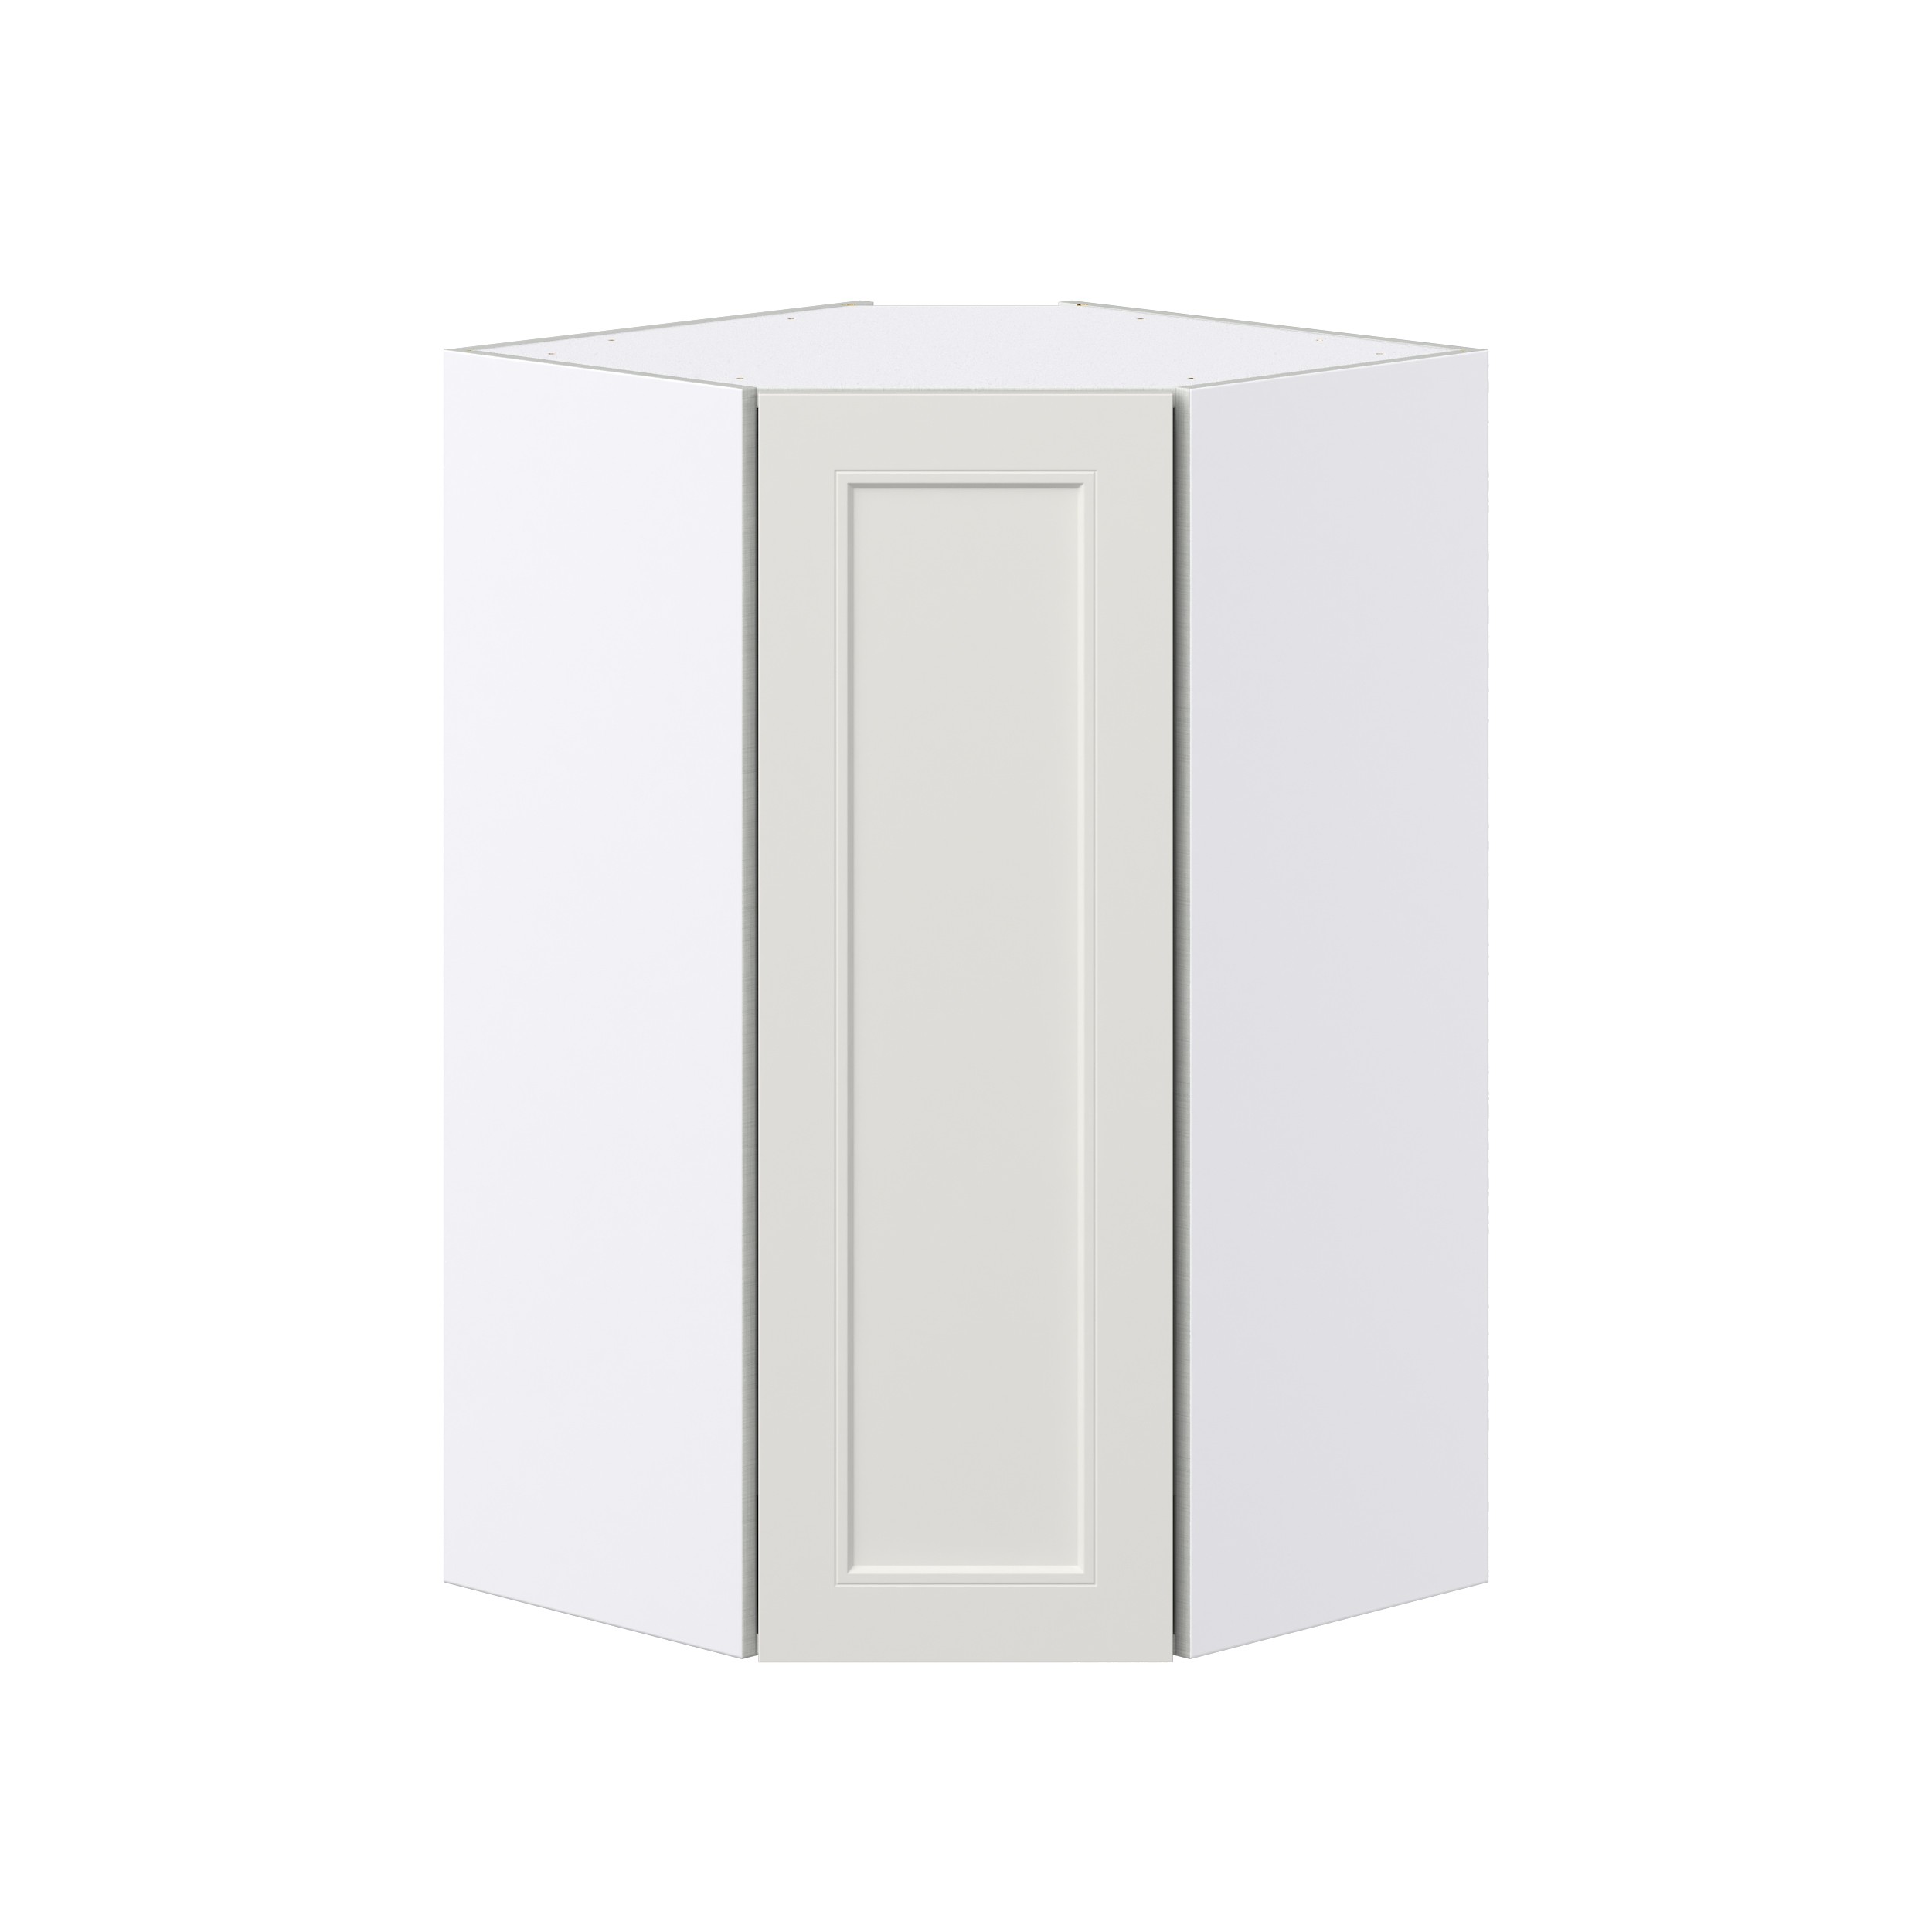 Wisteria Painted Light Gray Recessed Assembled Wall Diagonal Corner Cabinet with a Door (24 in. W x 40 in. H x 24 in. D)